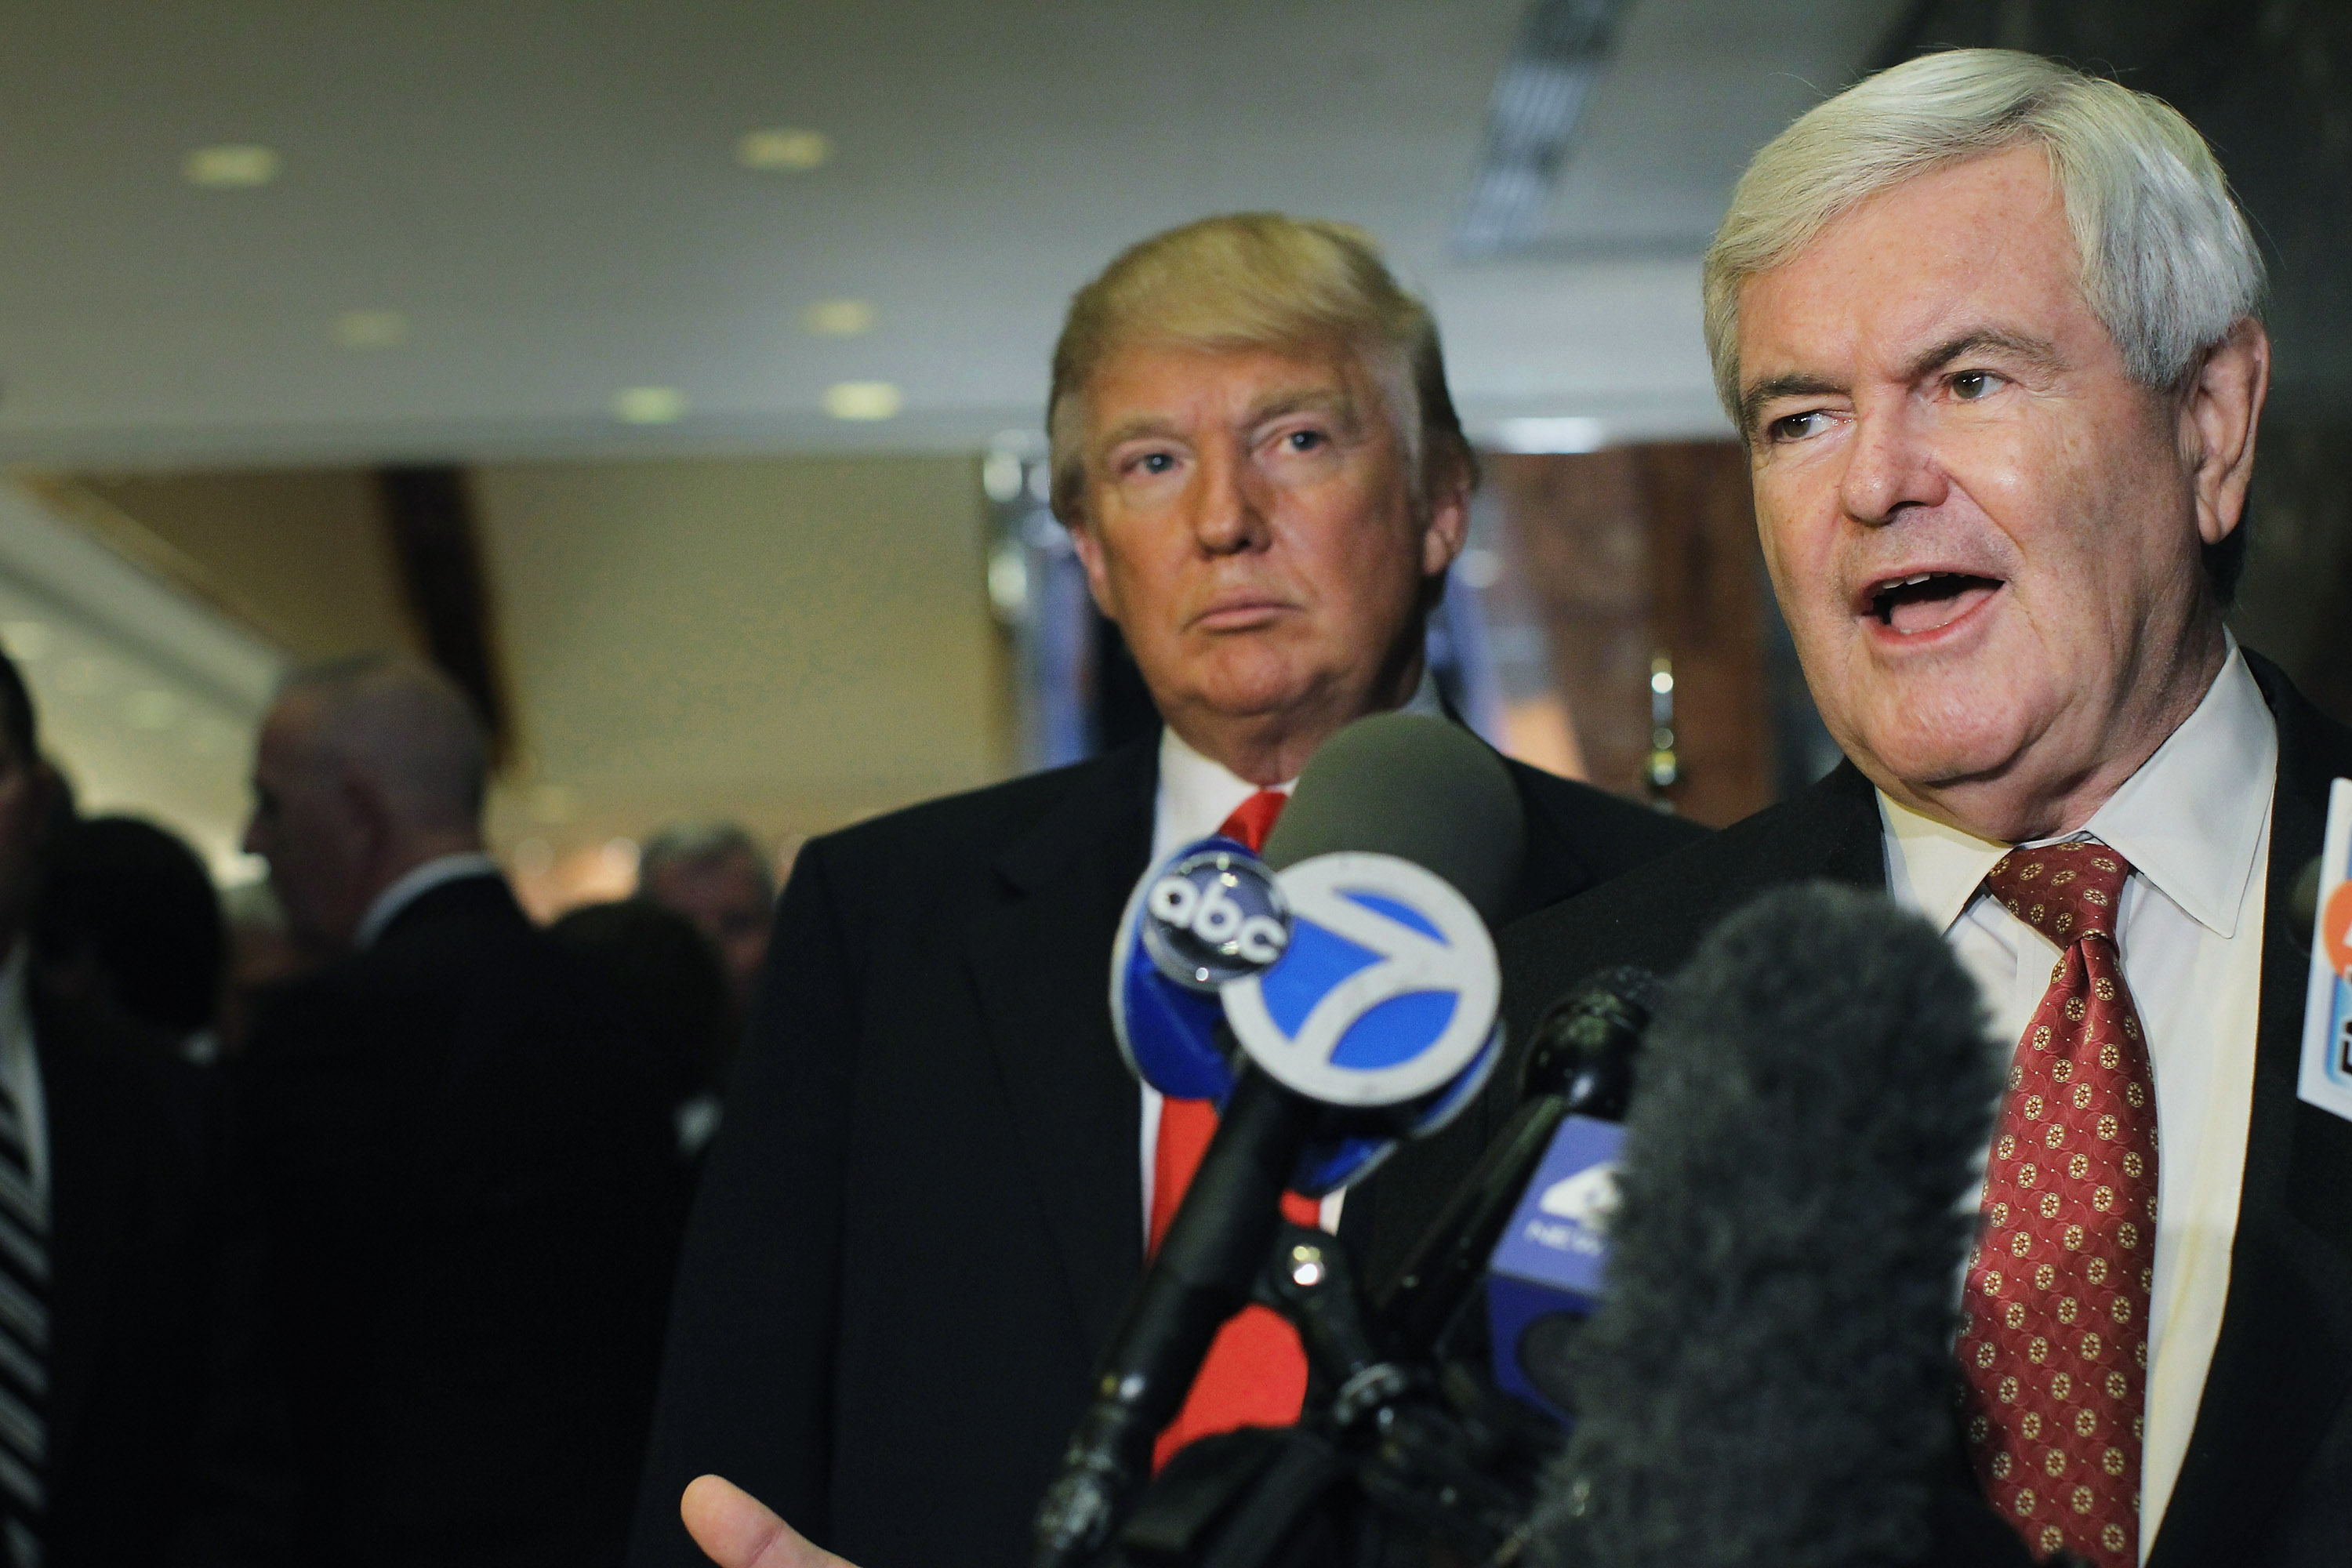 Then-Republican presidential nominee hopeful Newt Gingrich speaking to the media after a meeting with Donald Trump on December 5, 2011 in New York City. (Spencer Platt&mdash;Getty Images)